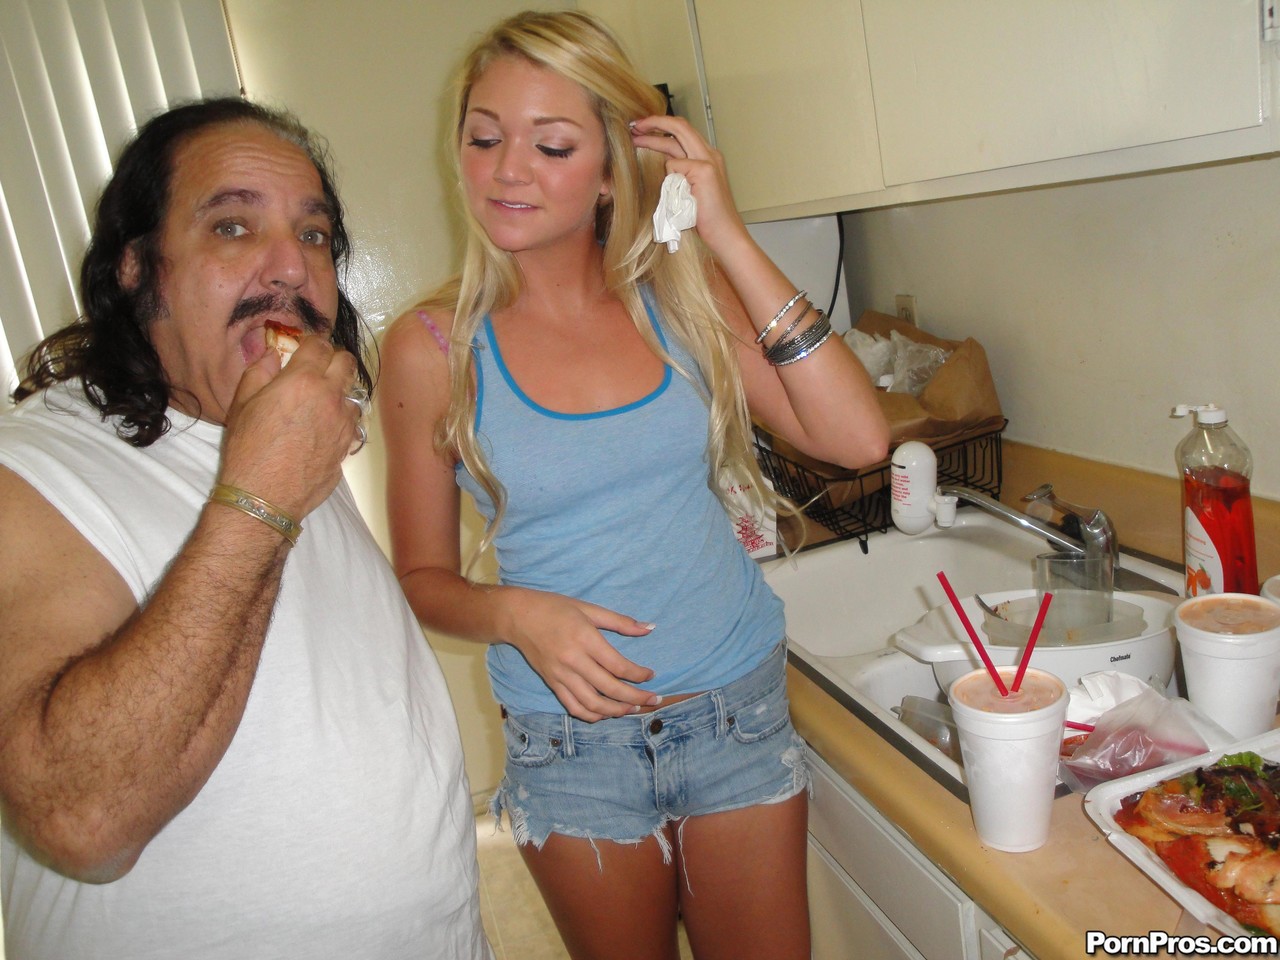 Sweet young blonde Jessie Andrews swallowing and riding an old man's cock porn photo #422620478 | Porn Pros Network Pics, Jessie Andrews, Ron Jeremy, Blonde, mobile porn